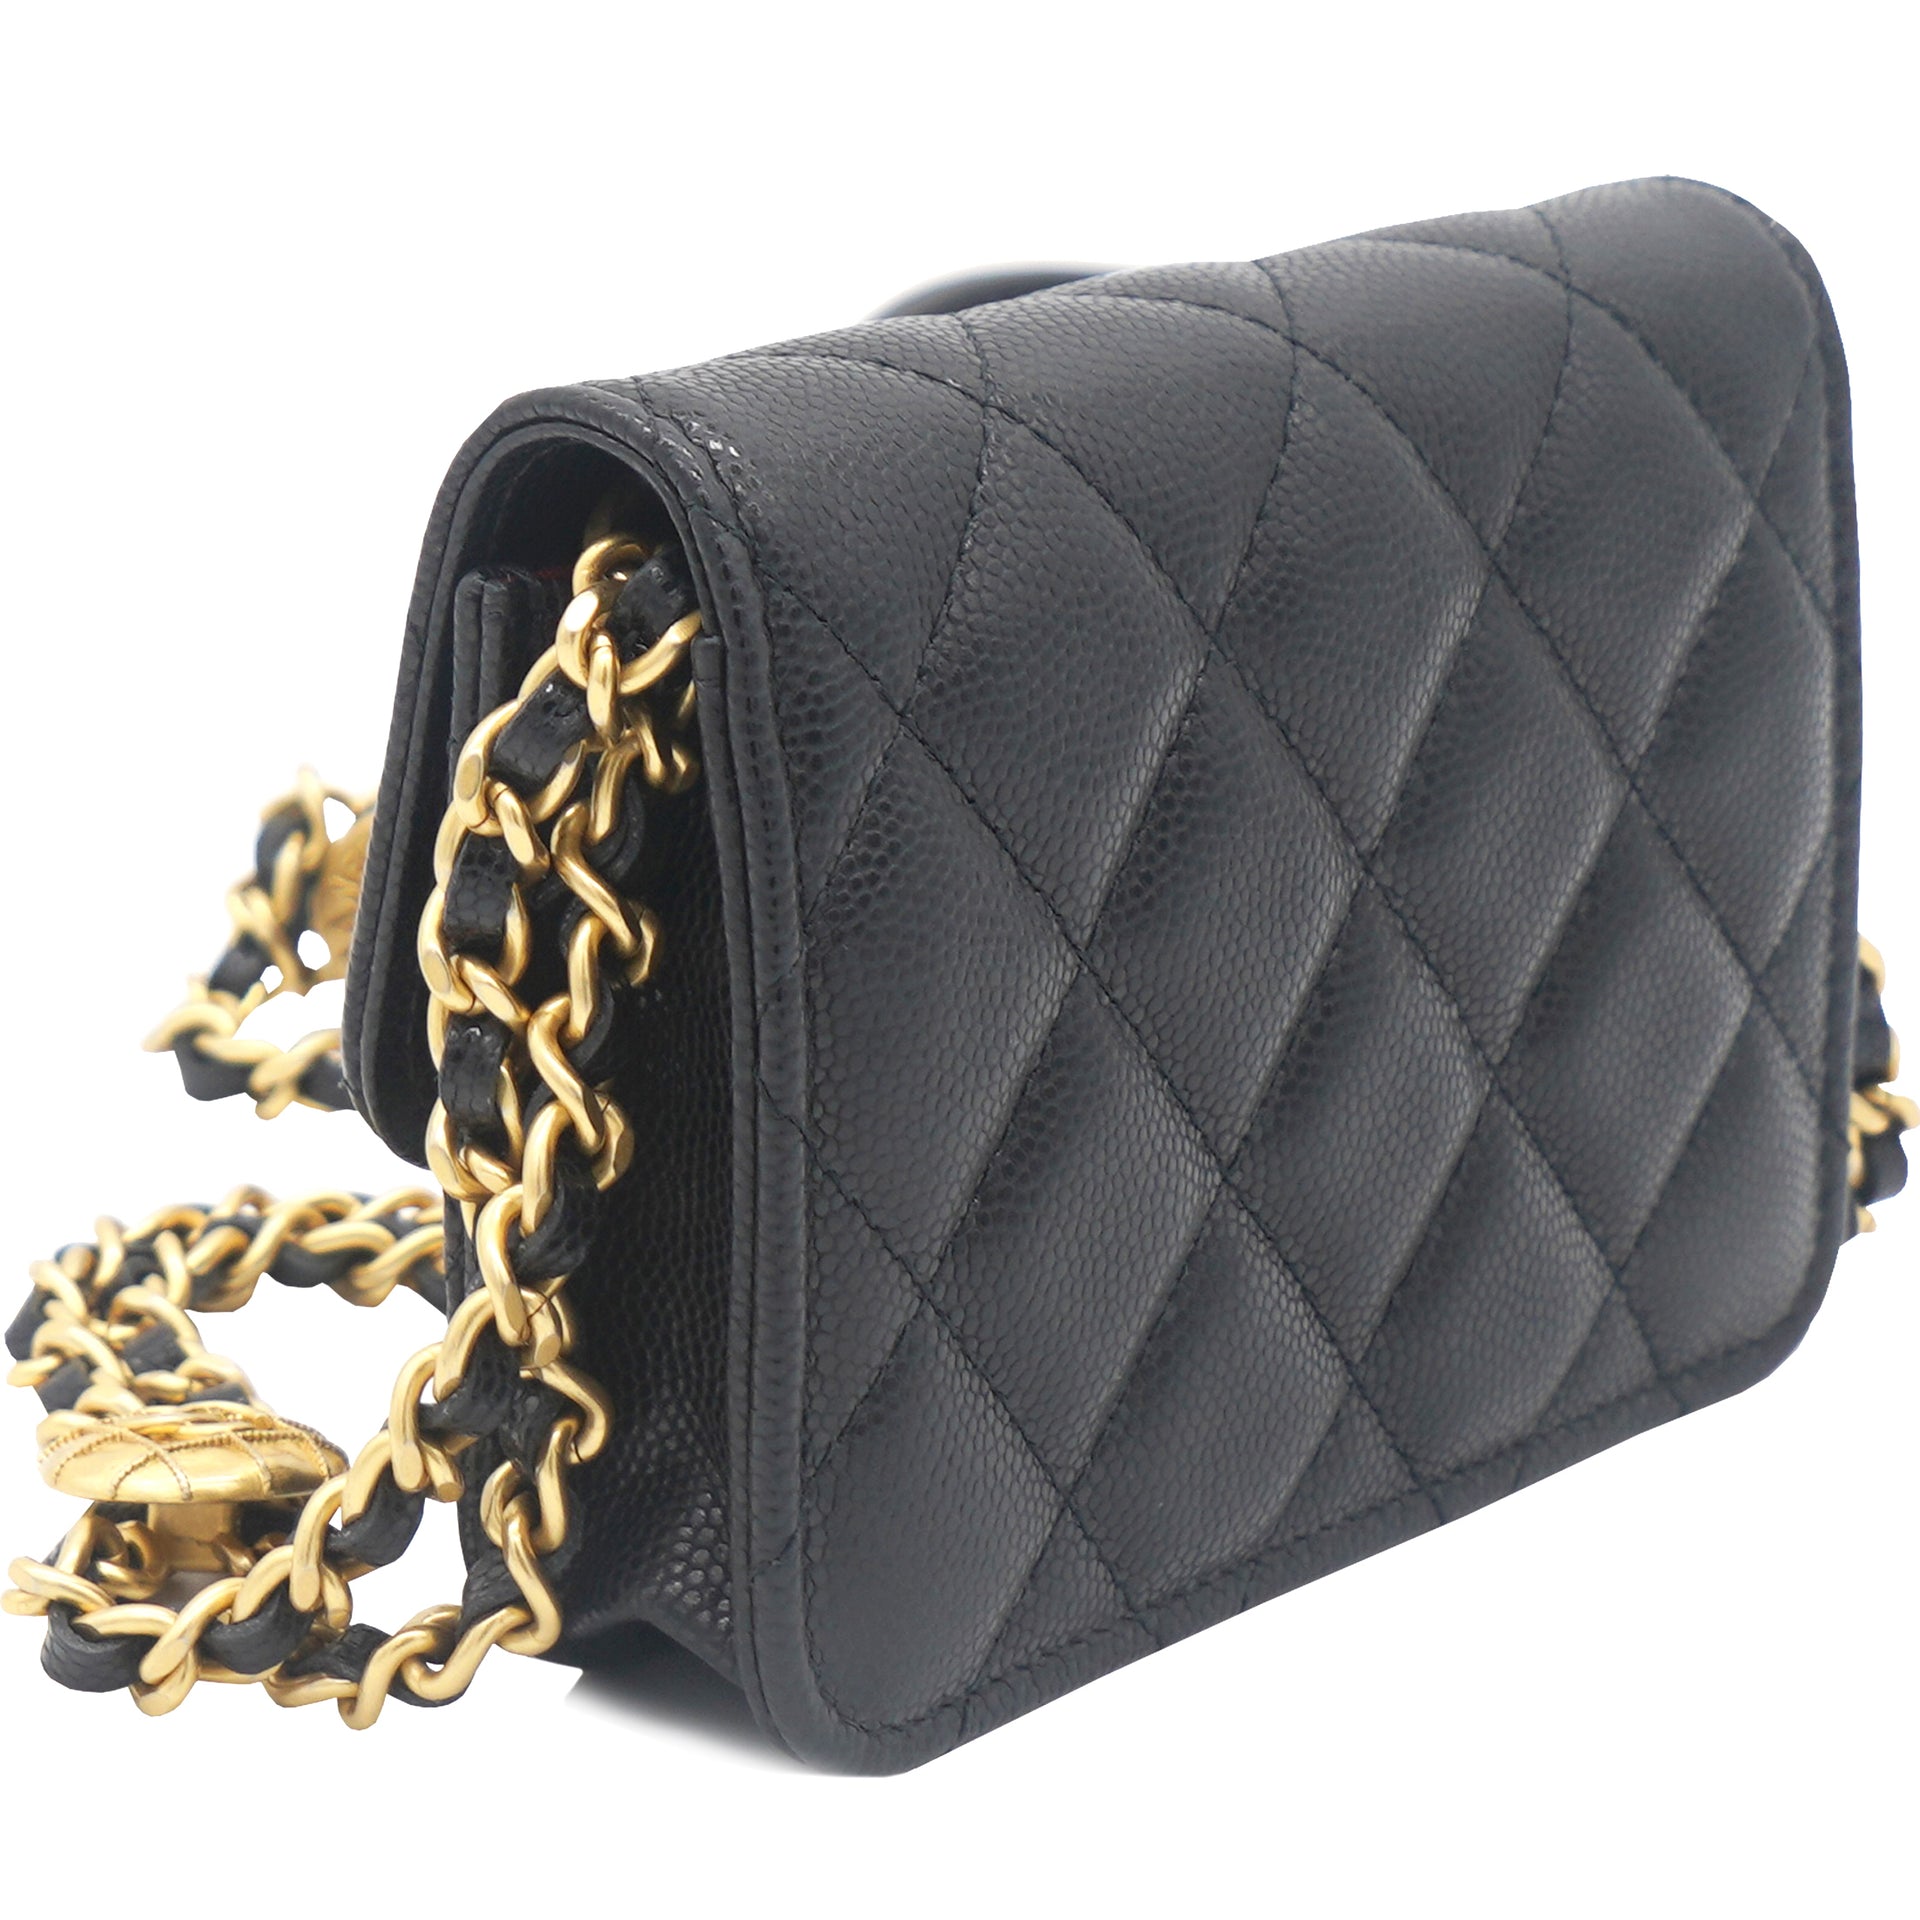 CHANEL Lambskin Quilted CC Pearl Crush Wallet on Chain WOC White